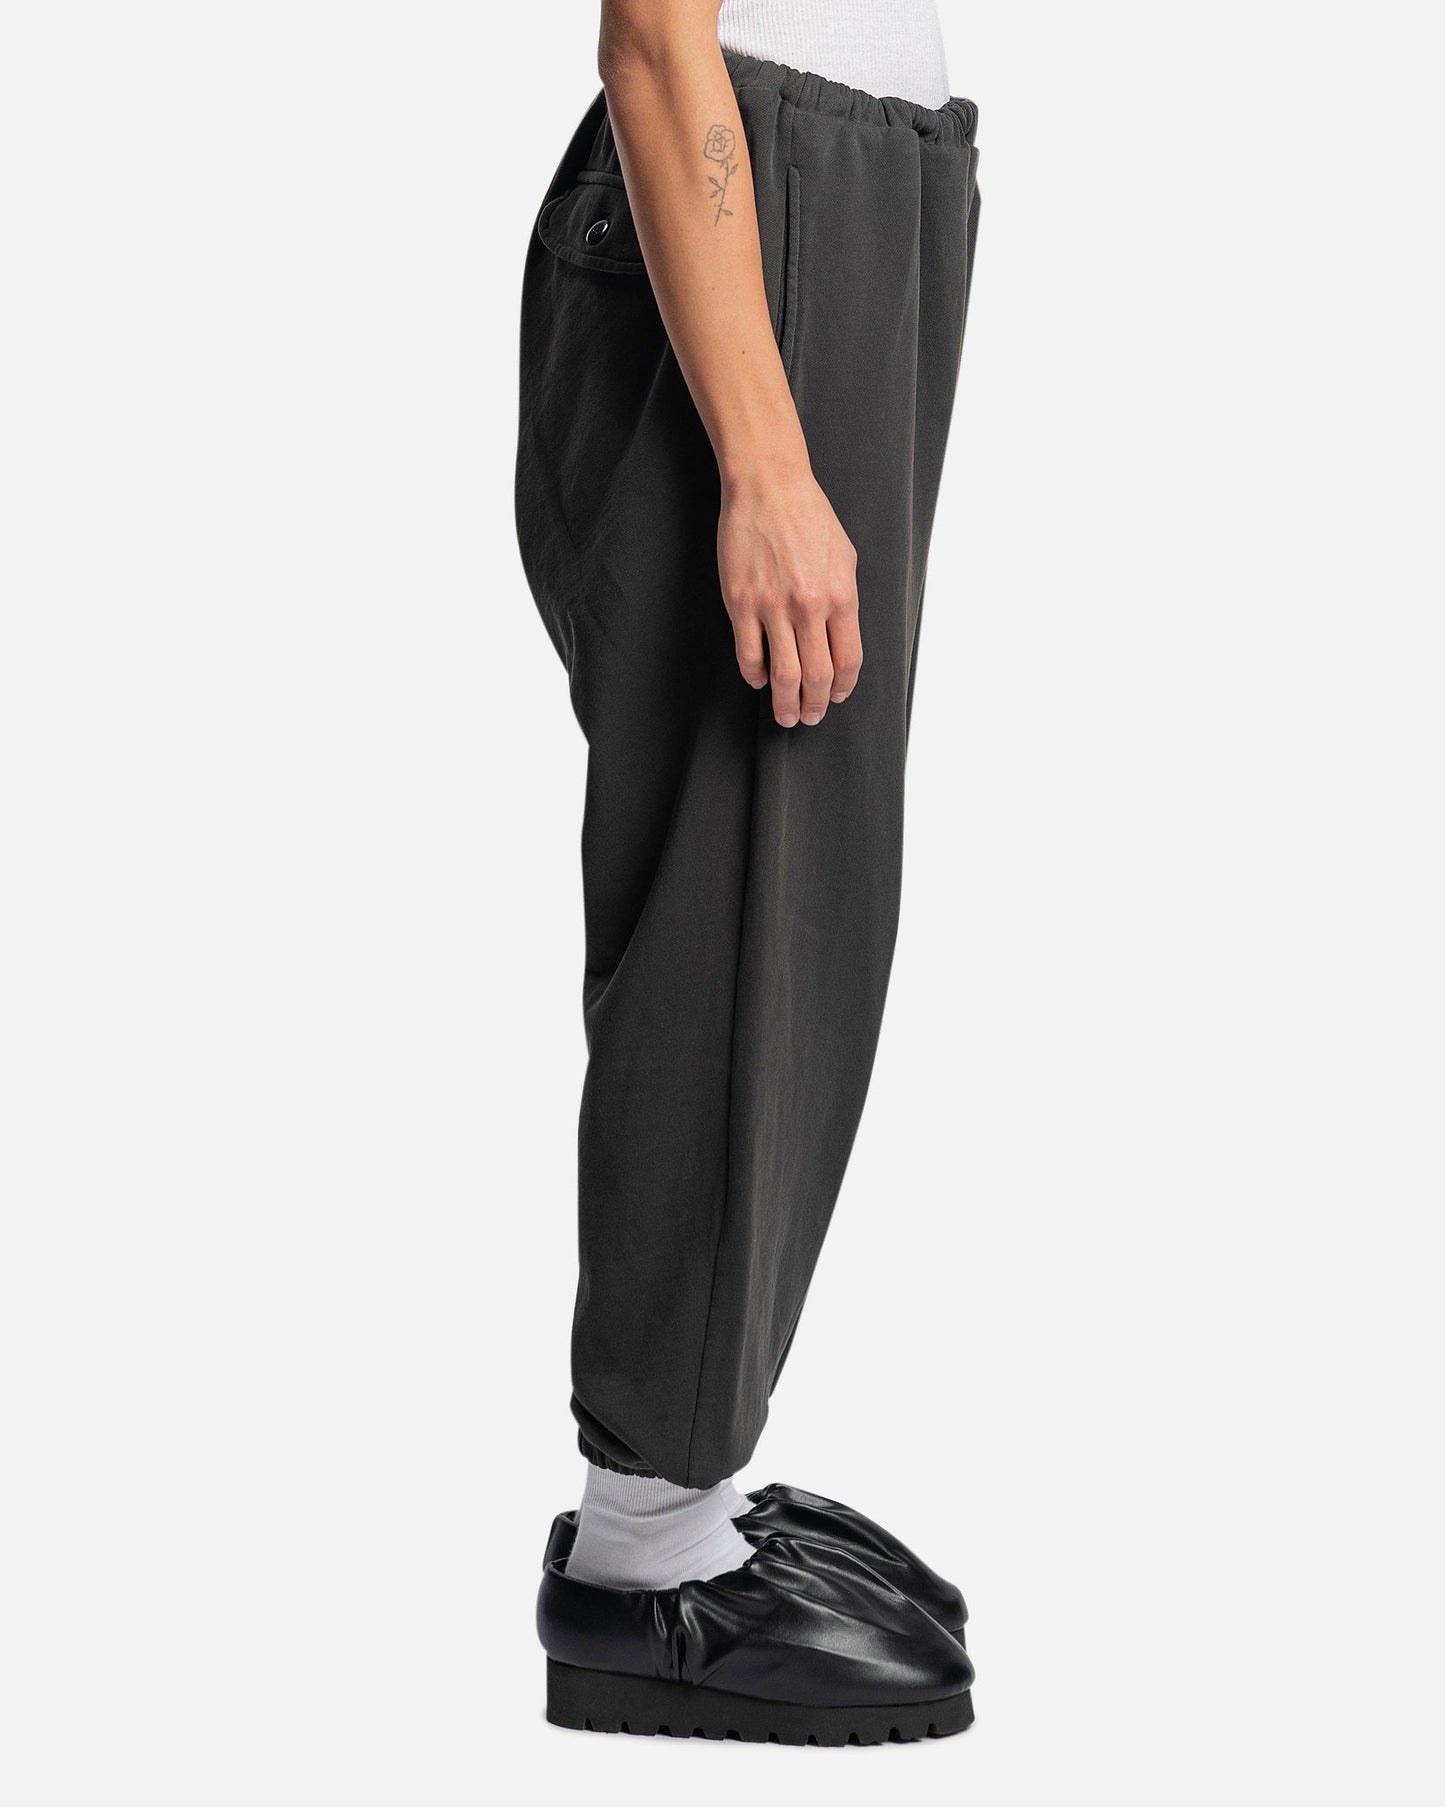 Willy Chavarria Men's Pants Big Daddy Sweat Pants in Jet Black